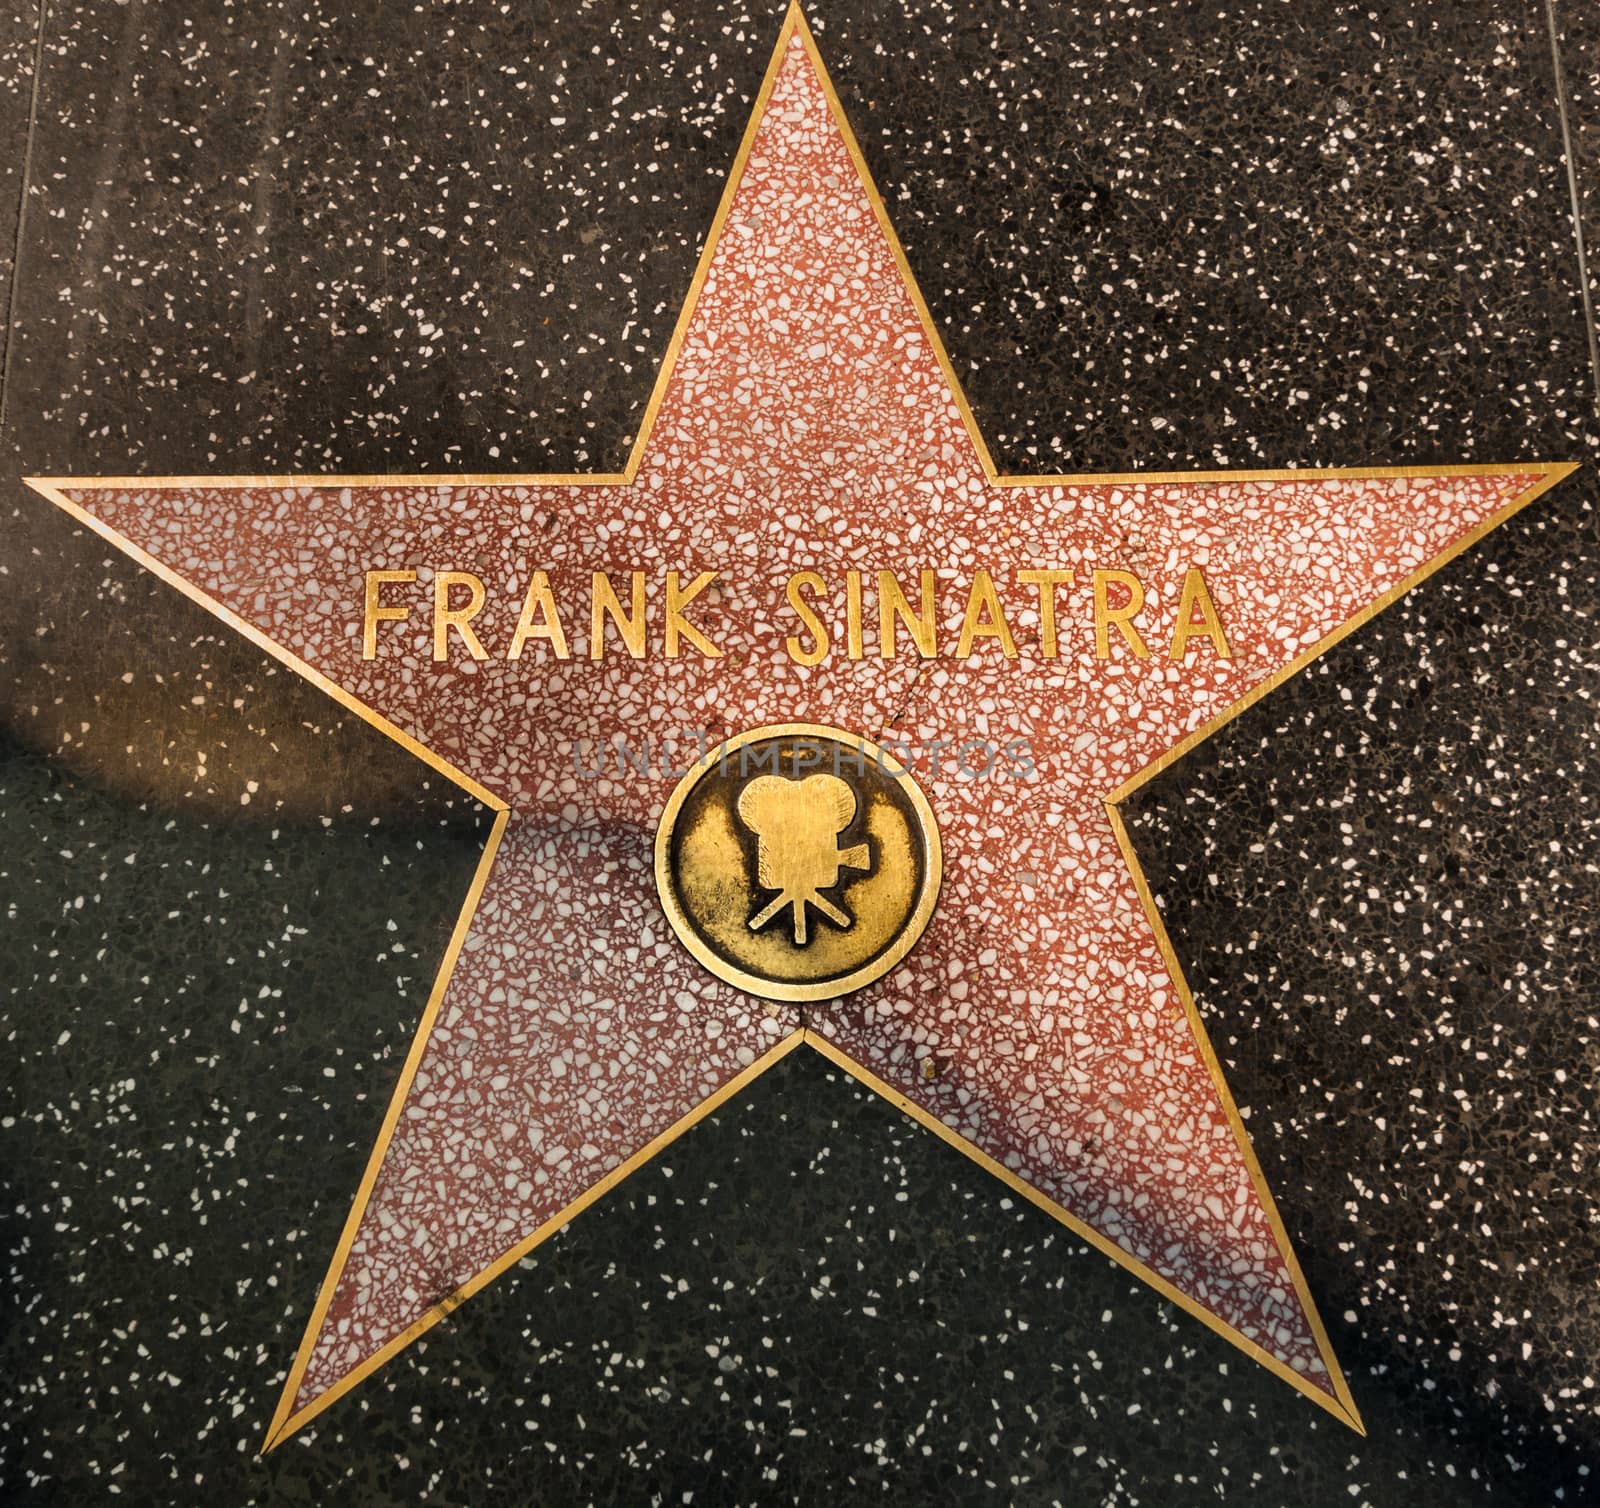 Frank Sinatra Hollywood Star in Los Angeles on street on AUGUST 23, 2013 in Los Angeles, USA.